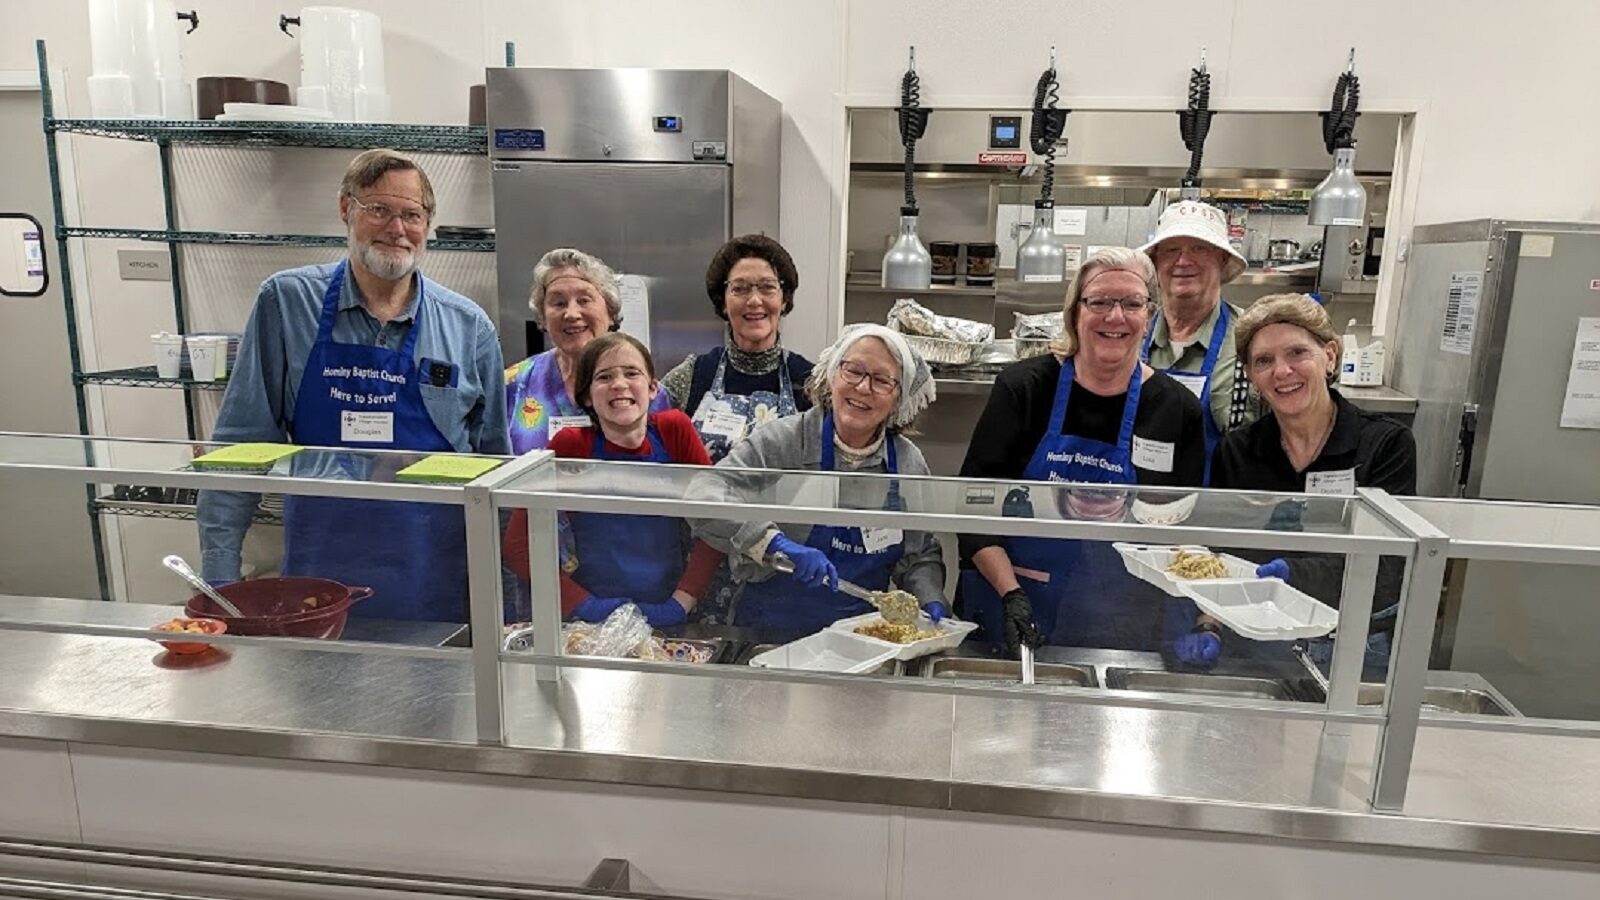 Hominy Baptist Church Serving Meals - ABCCM Transformation Village provides transitional housing for homeless women, mothers with children, and Veterans. 